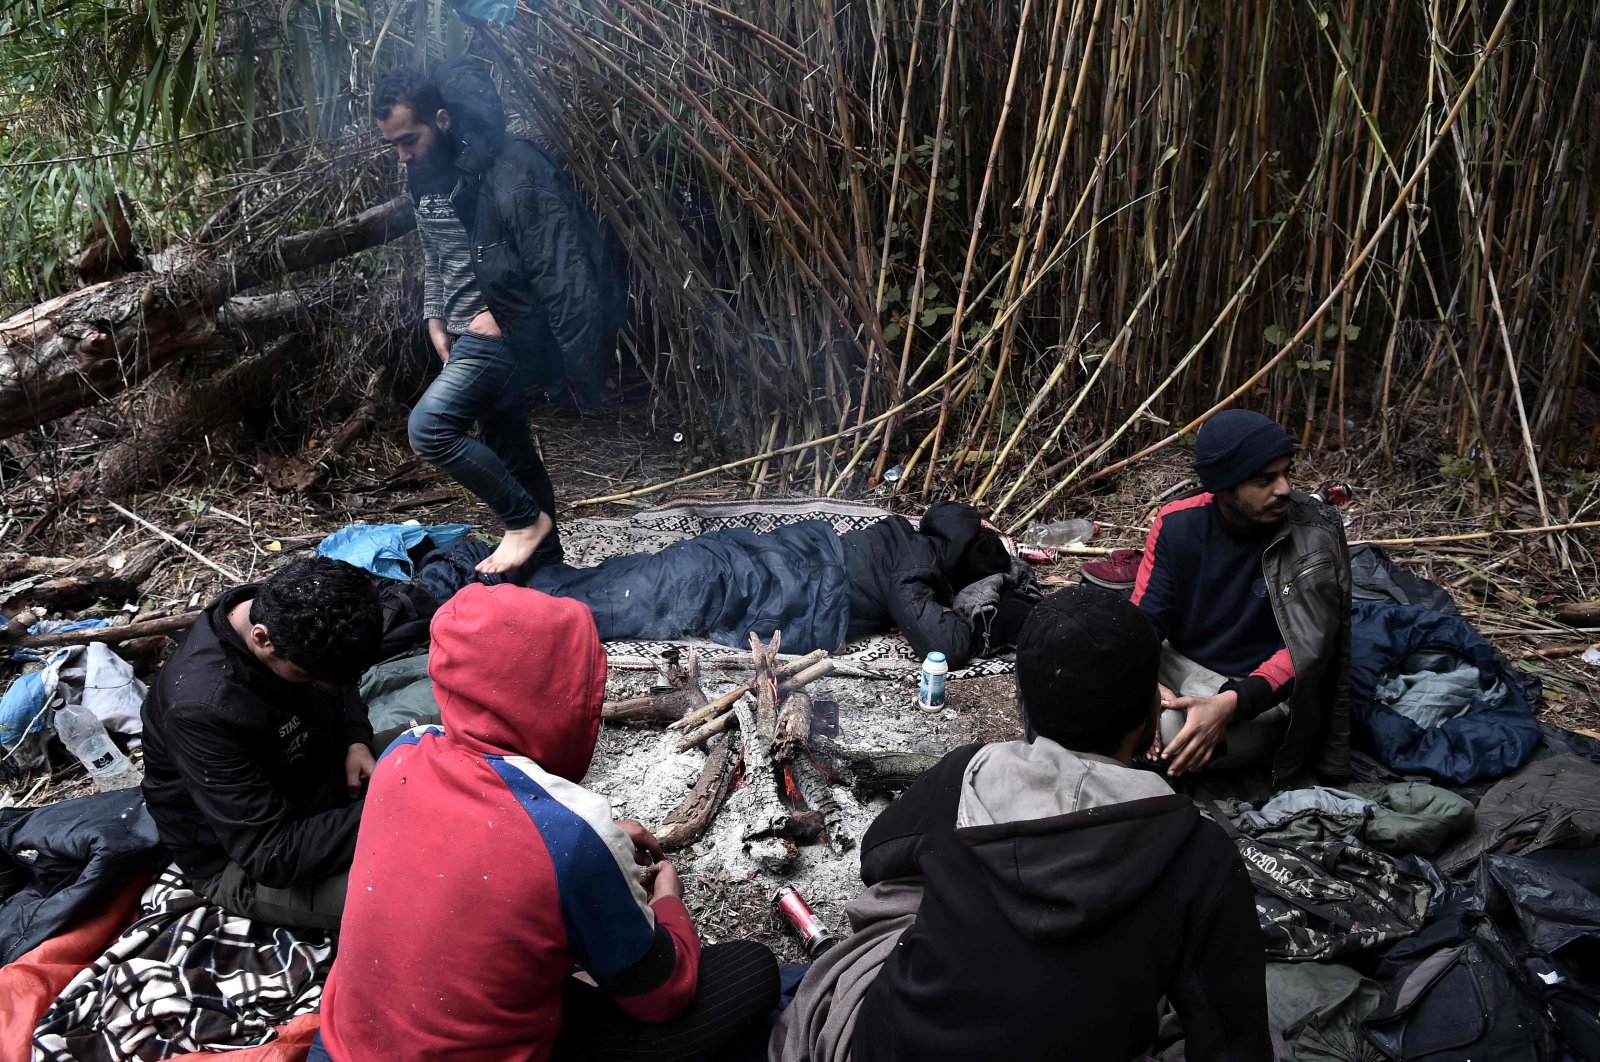 Migrants try to warm themselves by a fire near Idomeni at the border between Greece and North Macedonia on October 18, 2021. (AFP Photo)